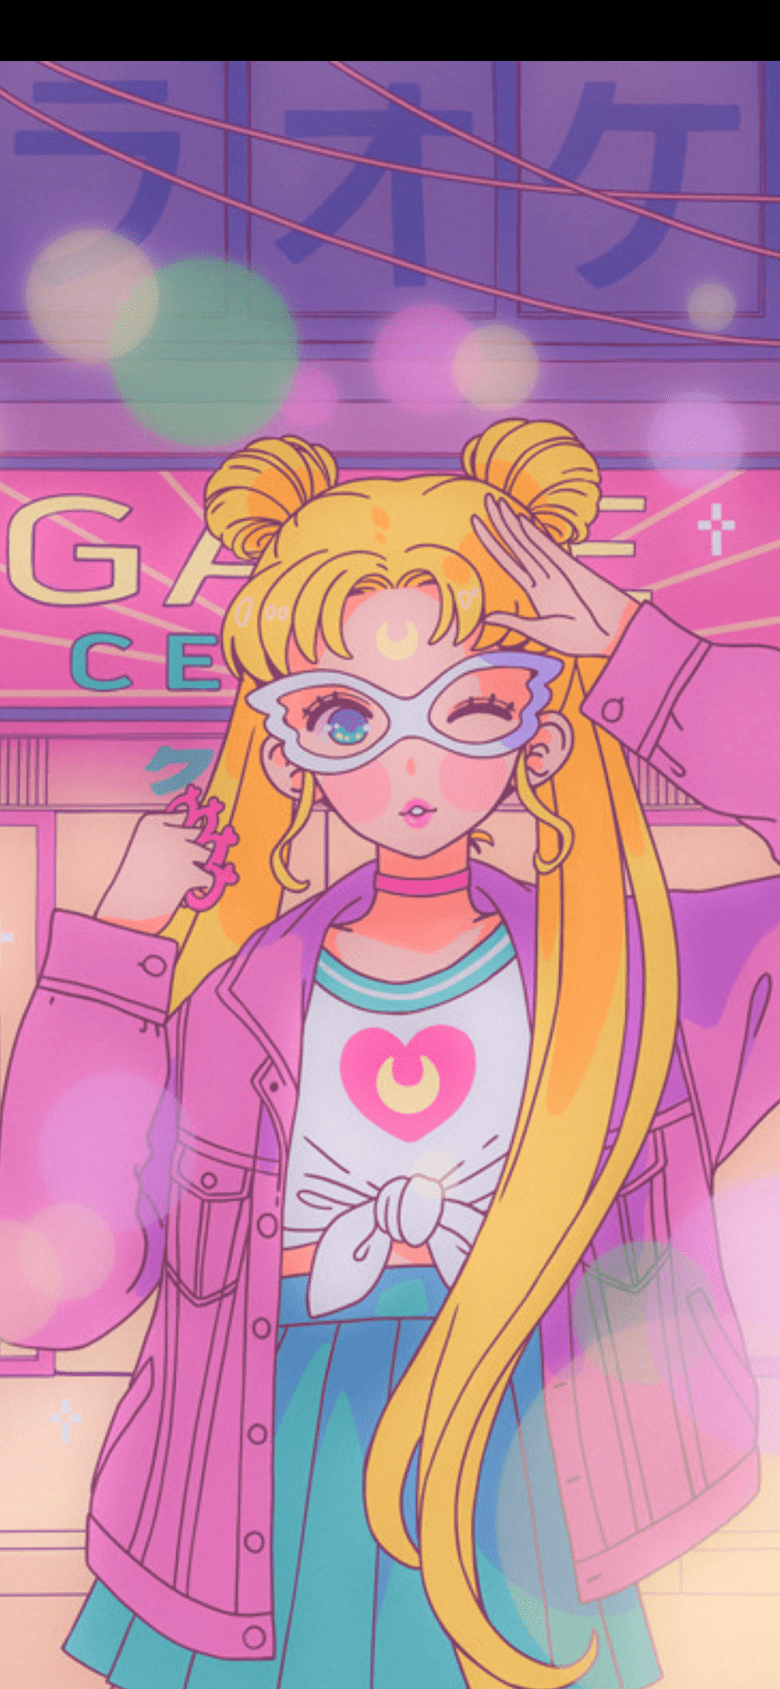 Sailor Neon Arcade Wallpaper's Ko Fi Shop Fi ❤️ Where Creators Get Support From Fans Through Donations, Memberships, Shop Sales And More! The Original 'Buy Me A Coffee' Page